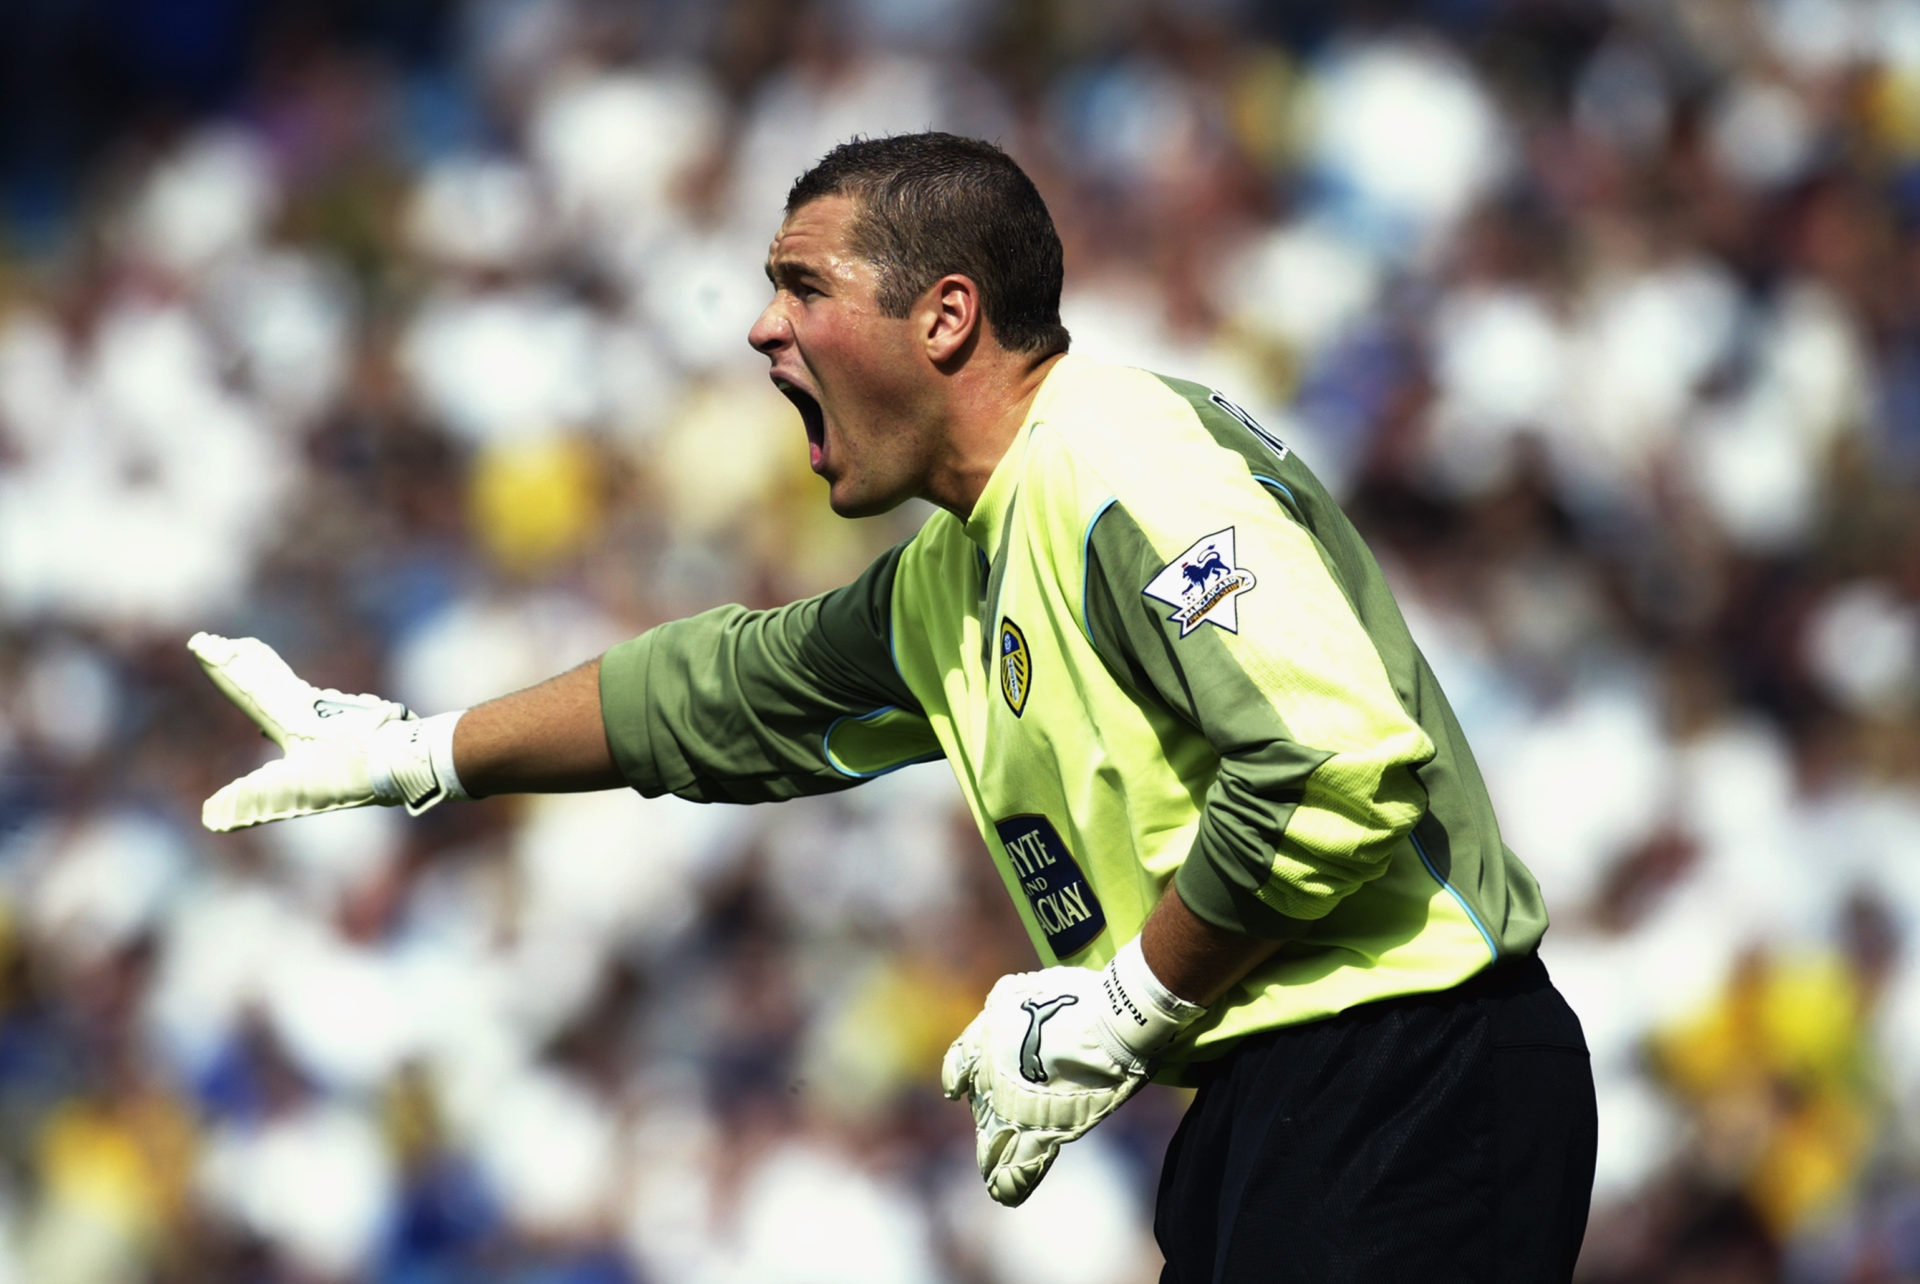 Paul Robinson of Leeds United signals to a team mate